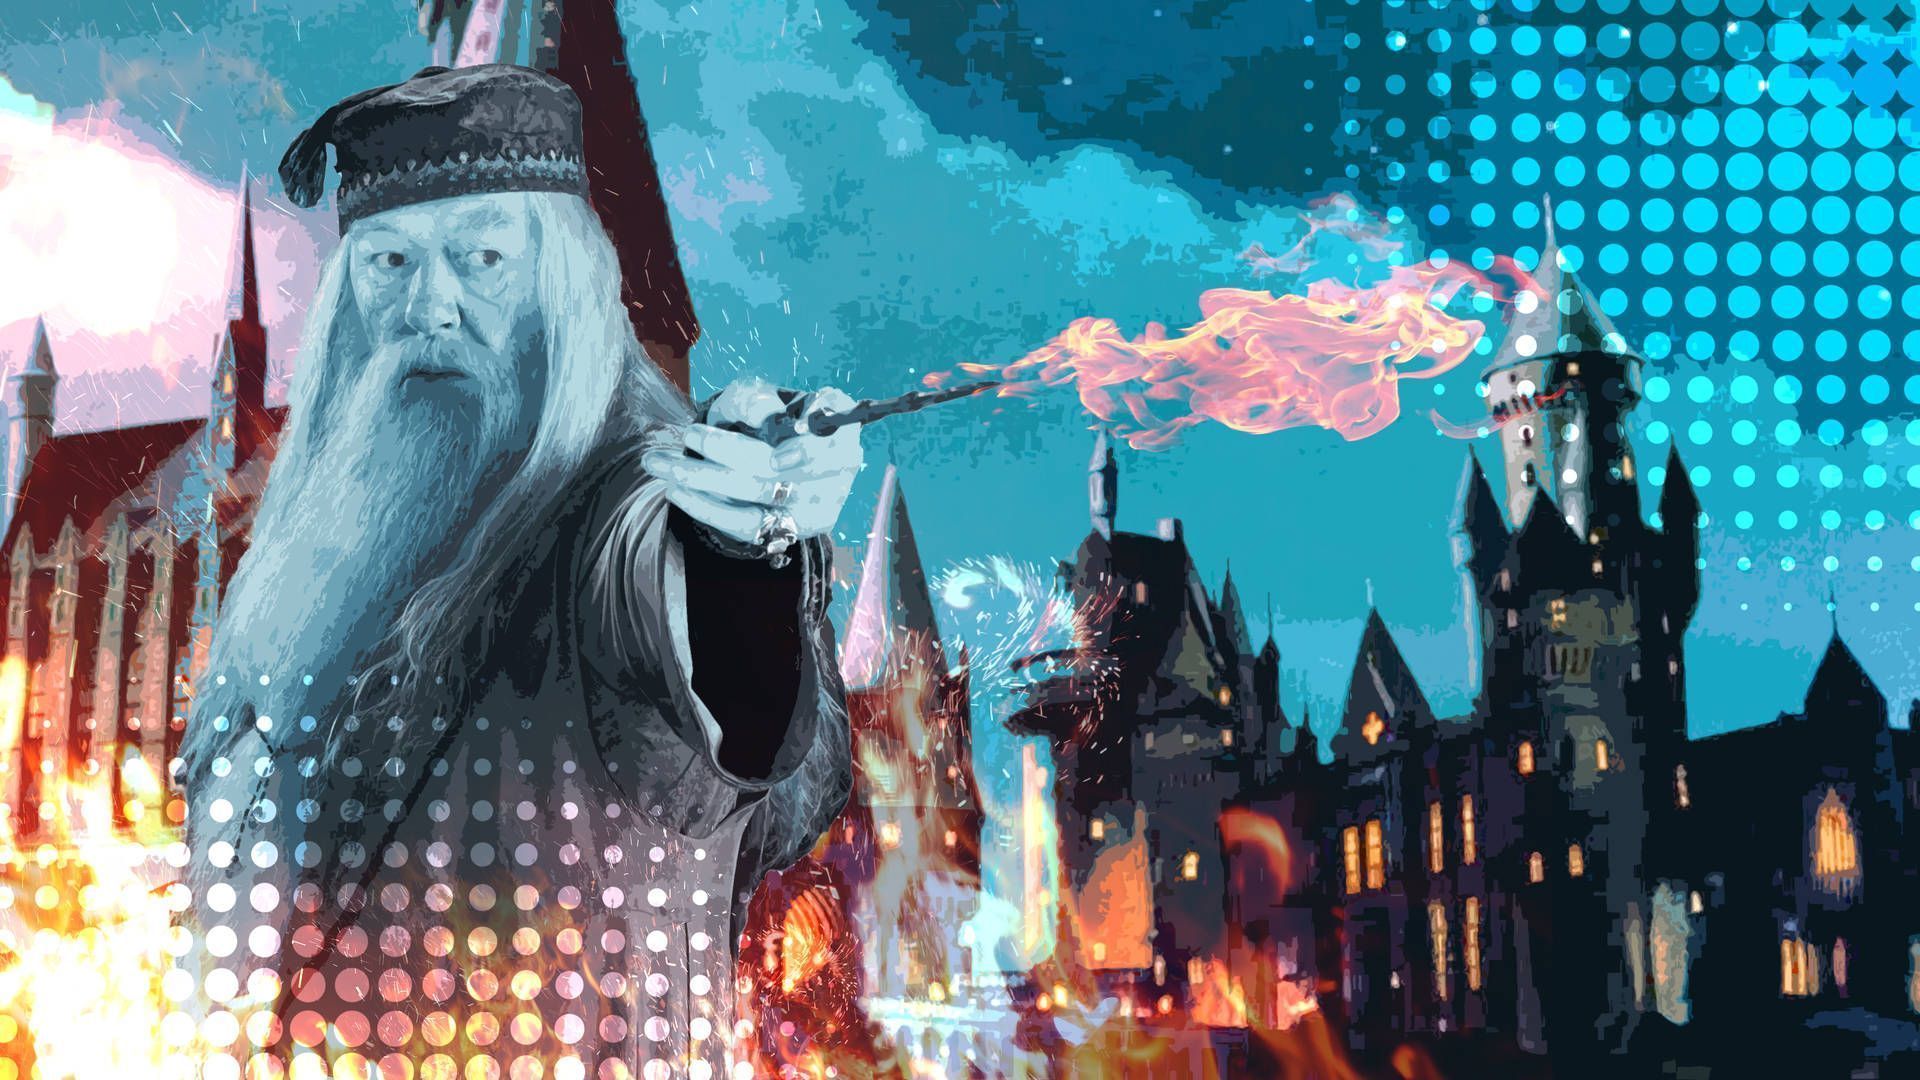 An illustration of Albus Dumbledore casting a spell with a dragon flying in front of Hogwarts - Harry Potter, Hogwarts